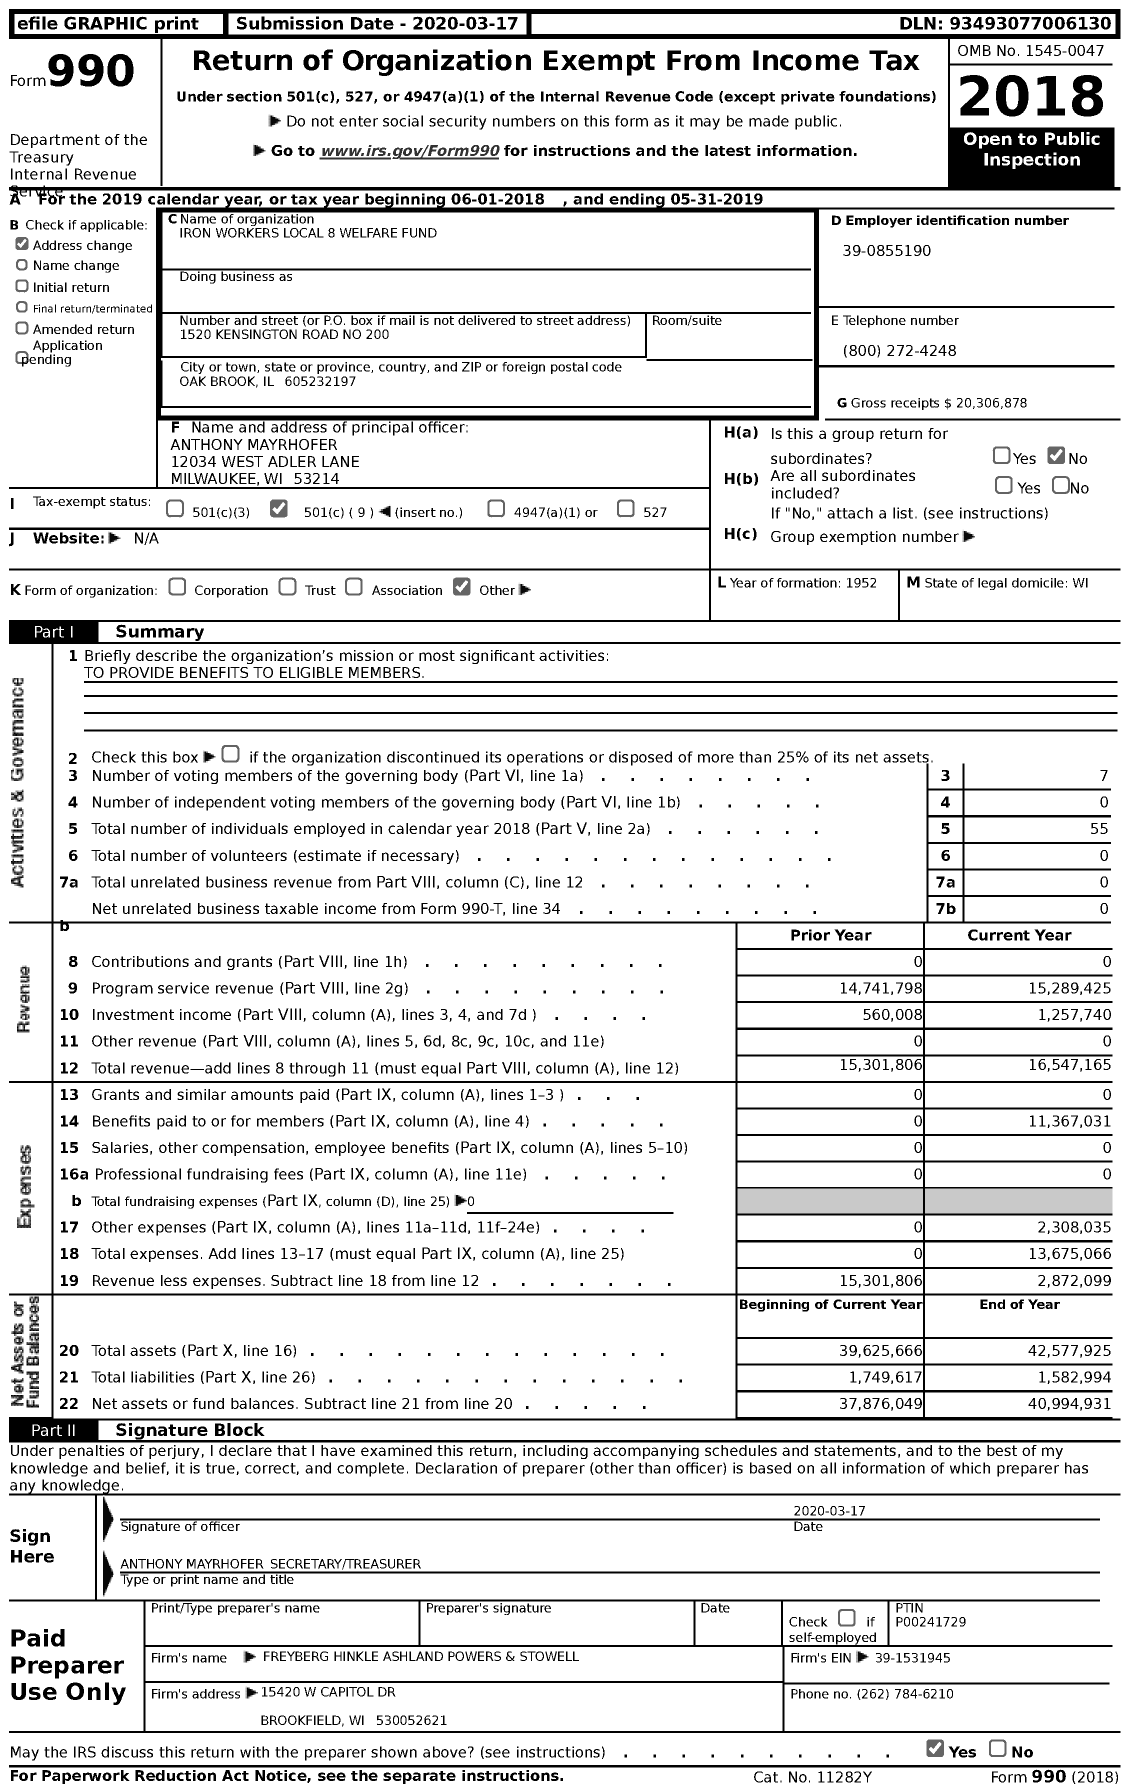 Image of first page of 2018 Form 990 for Iron Workers Local 8 Welfare Fund